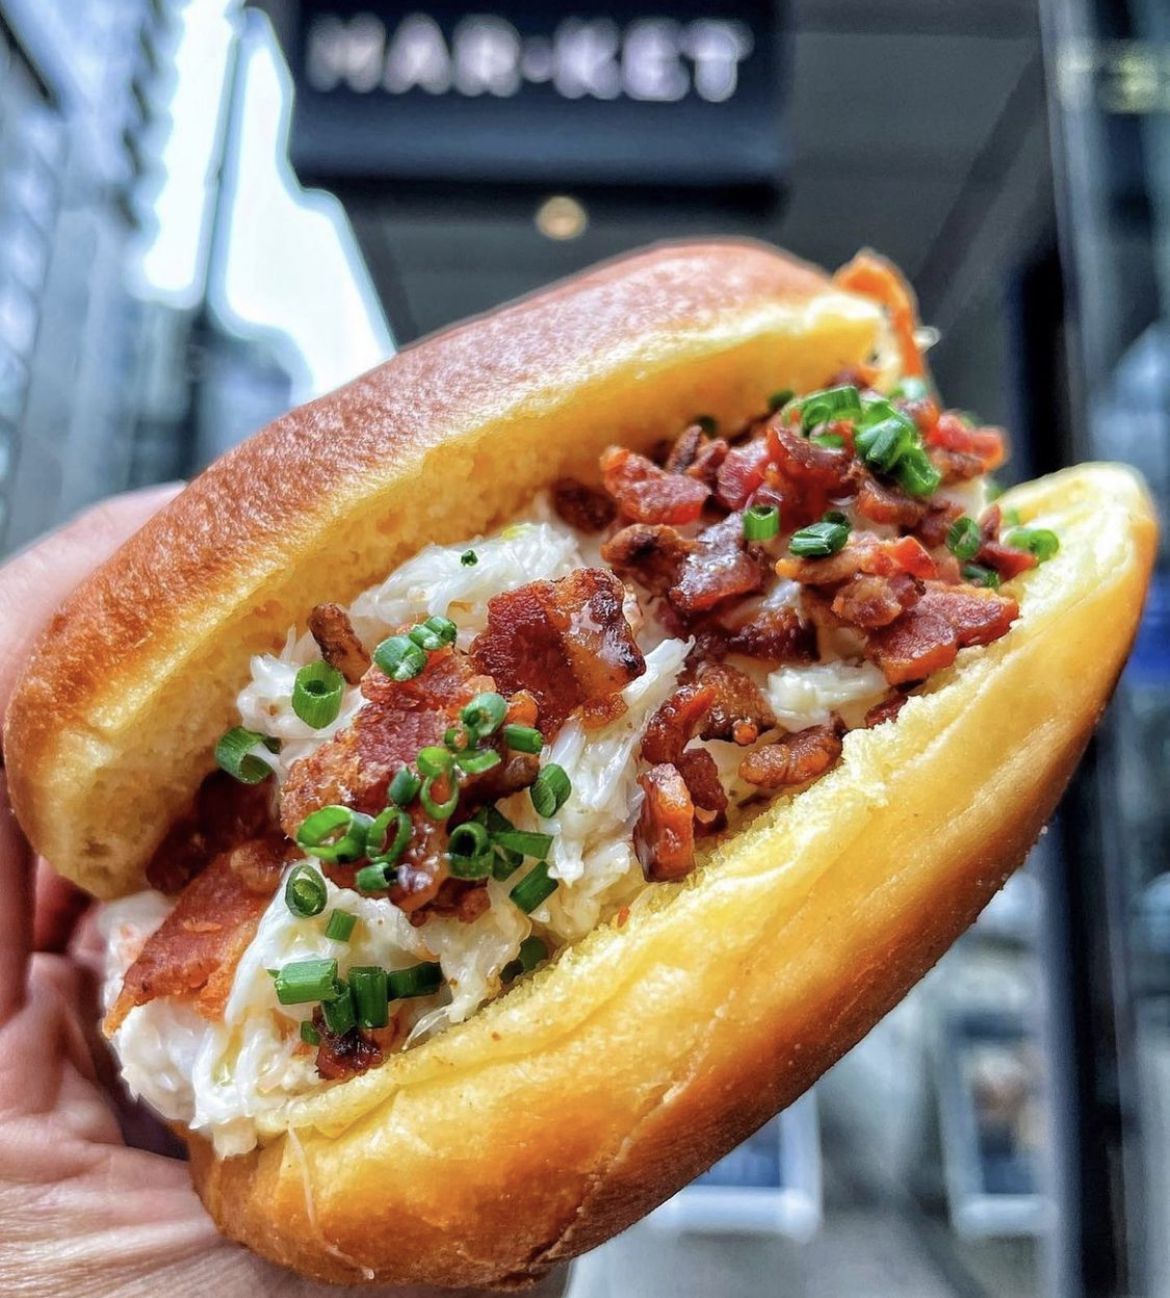 A crab roll loaded with bacon.